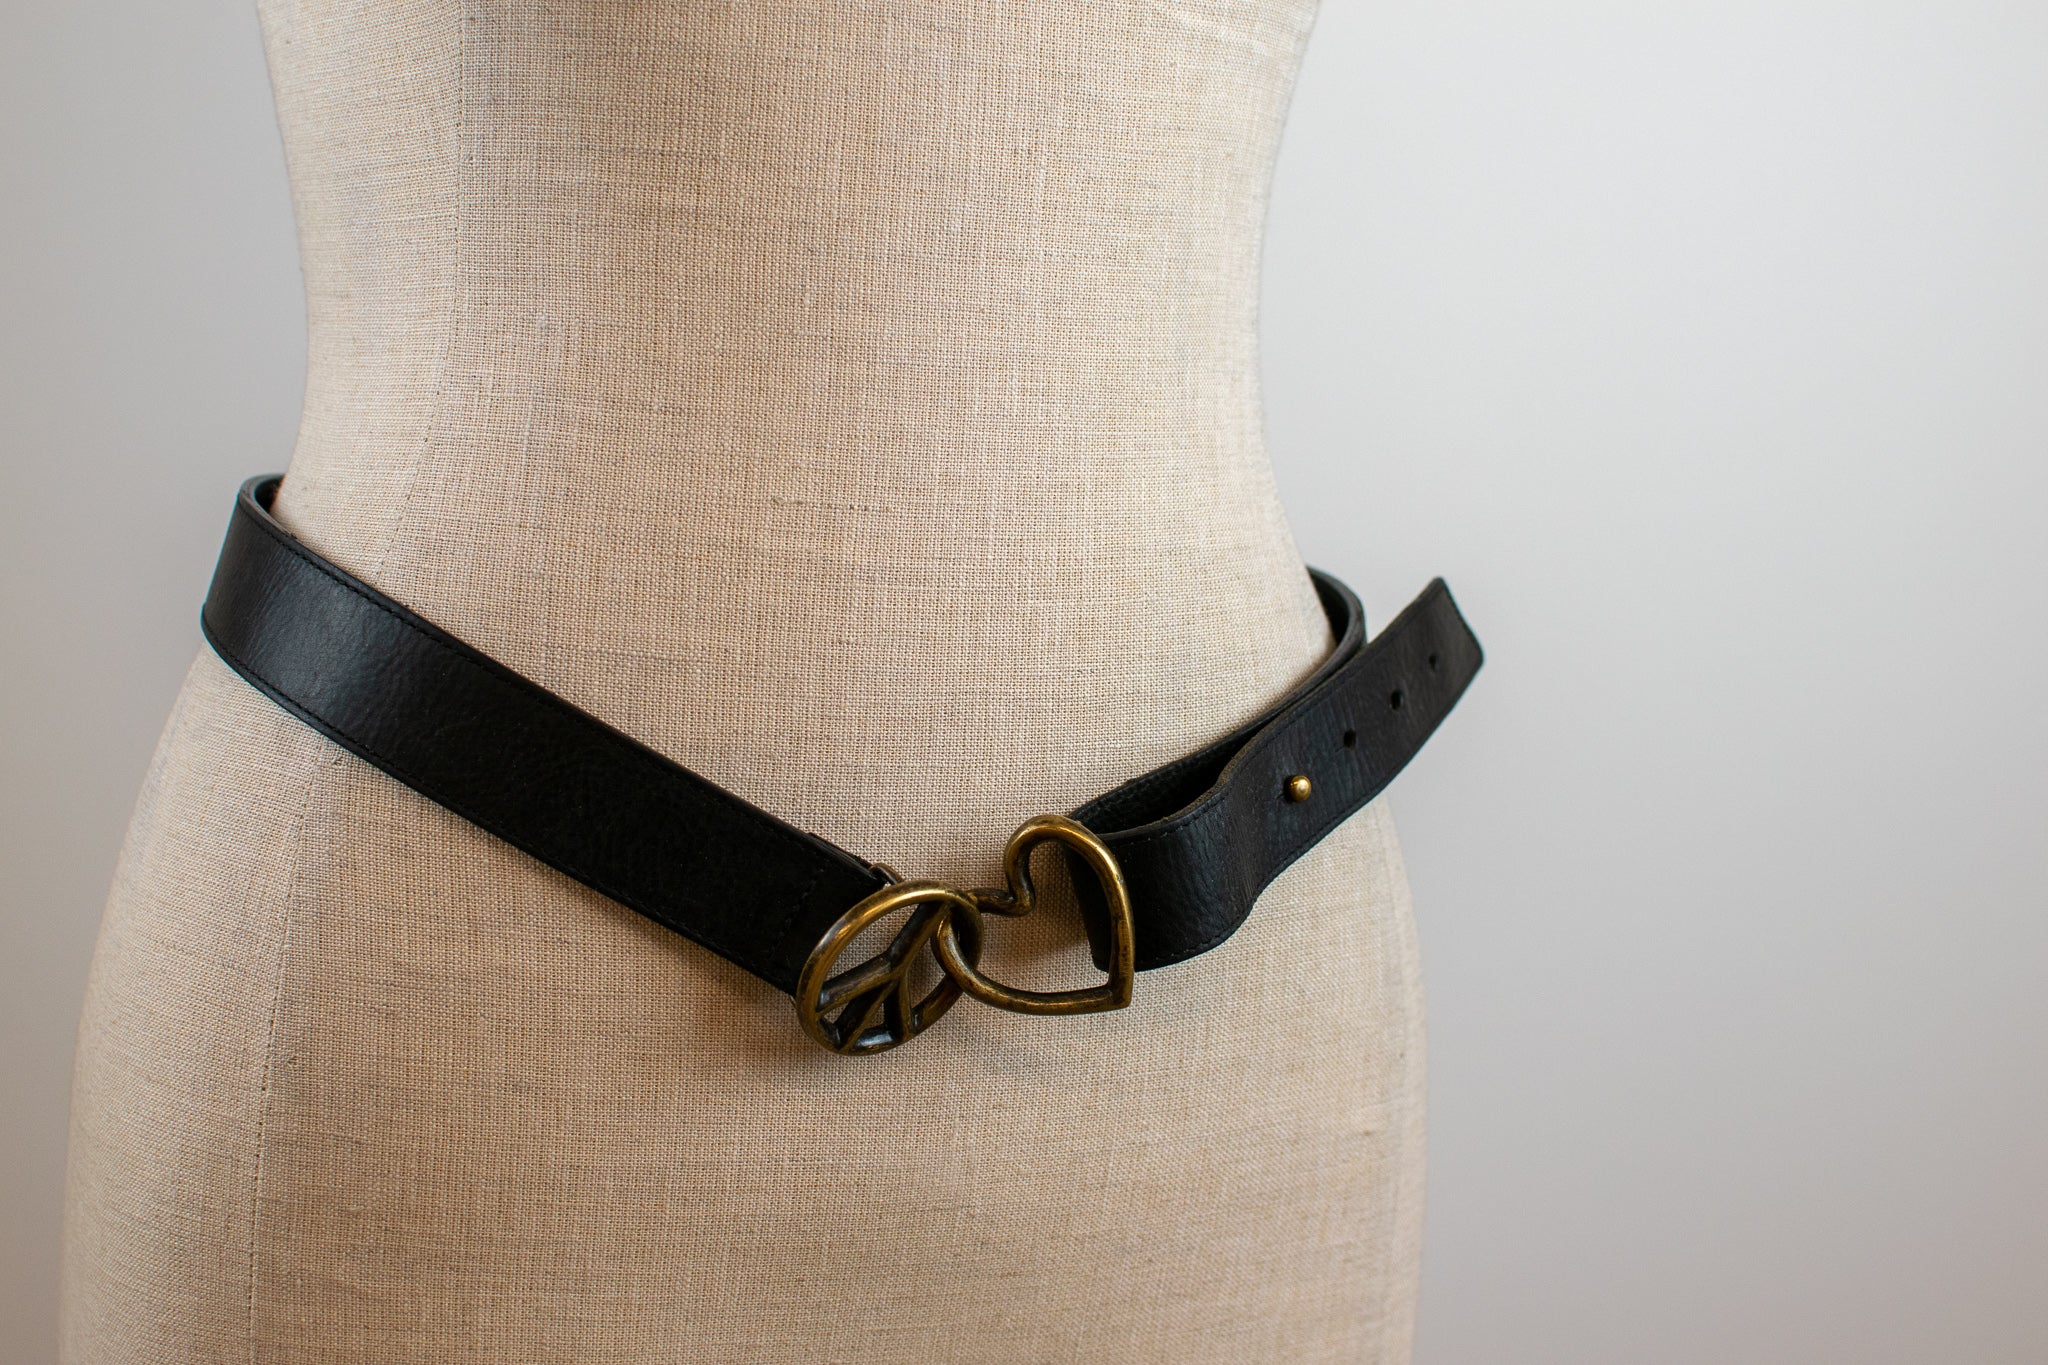 1990s Moschino Redwall Belt I Am Rich in Gold Letters on Brown Embossed Leather